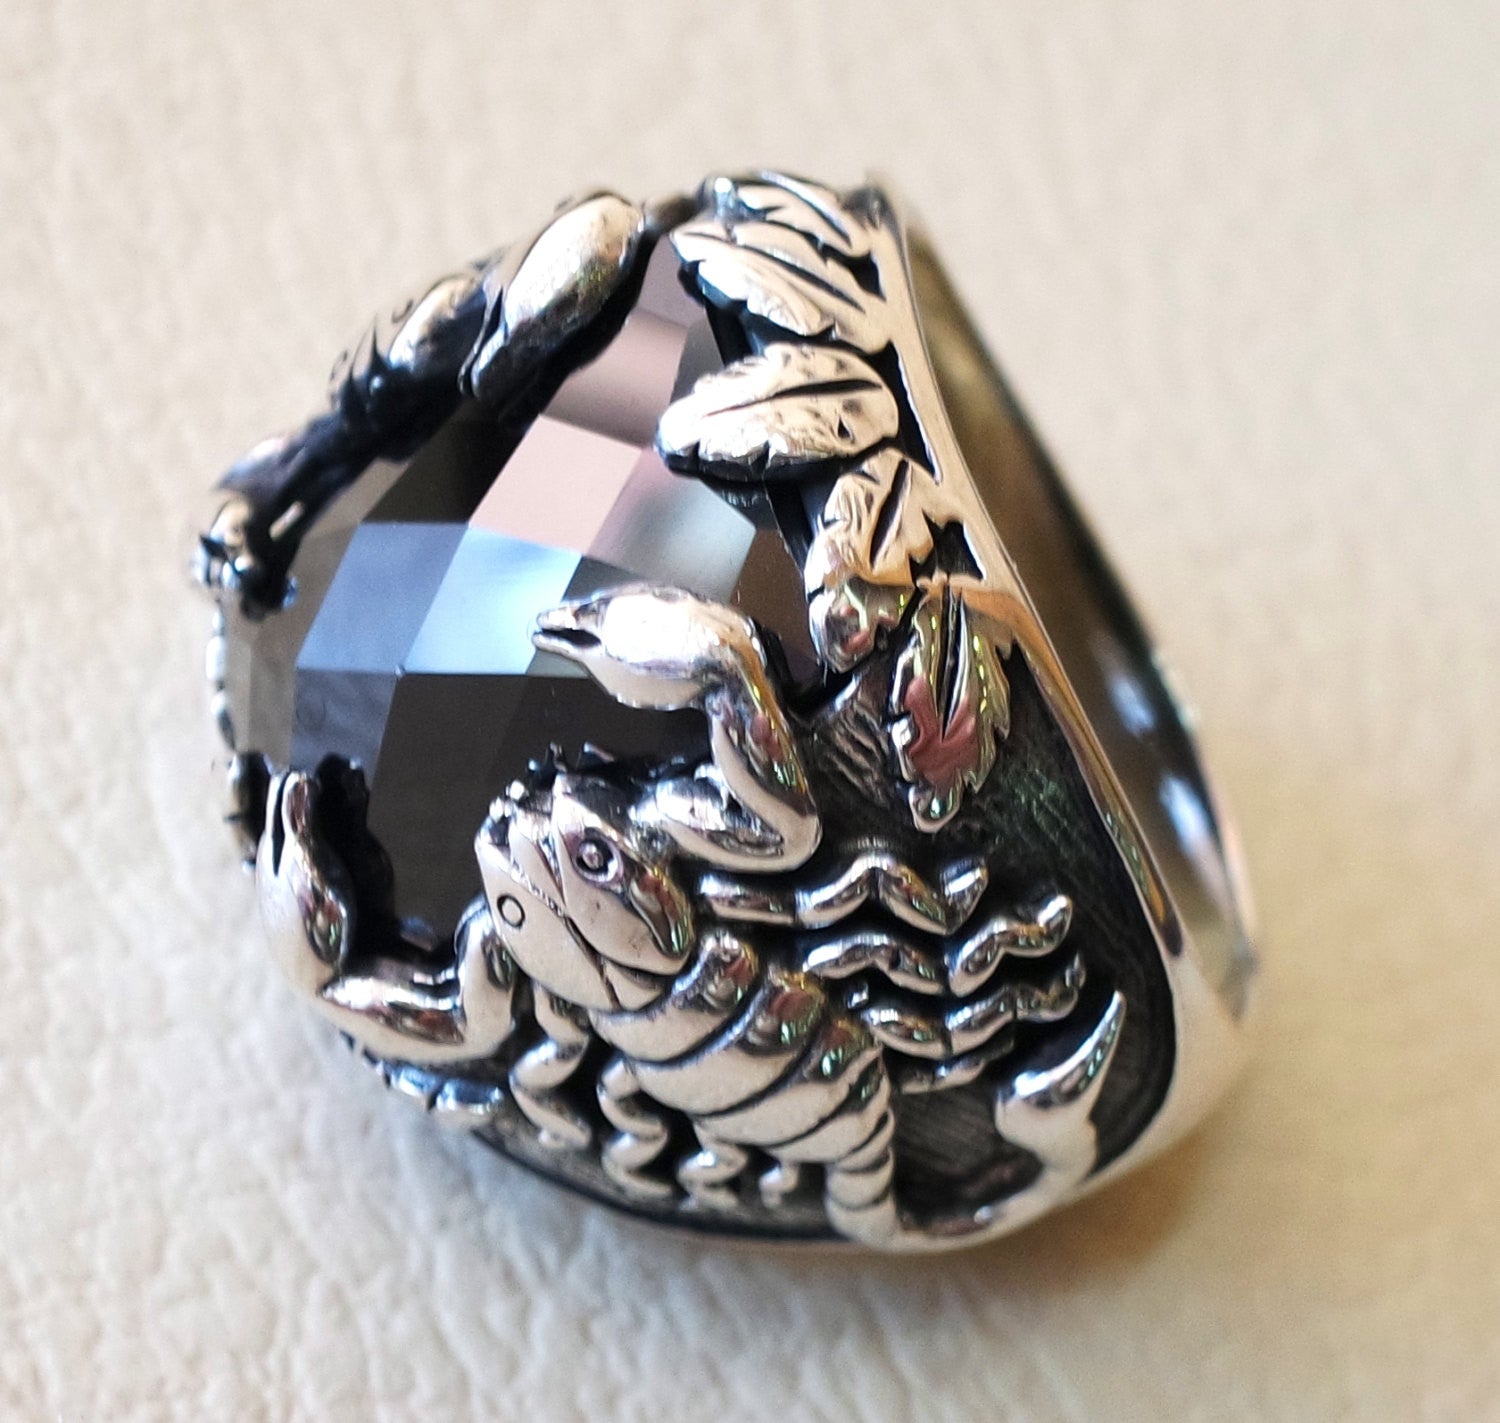 huge scorpion sterling silver 925 huge ring any size rectangular black onyx agate semi precious middle eastern vintage handmade jewelry